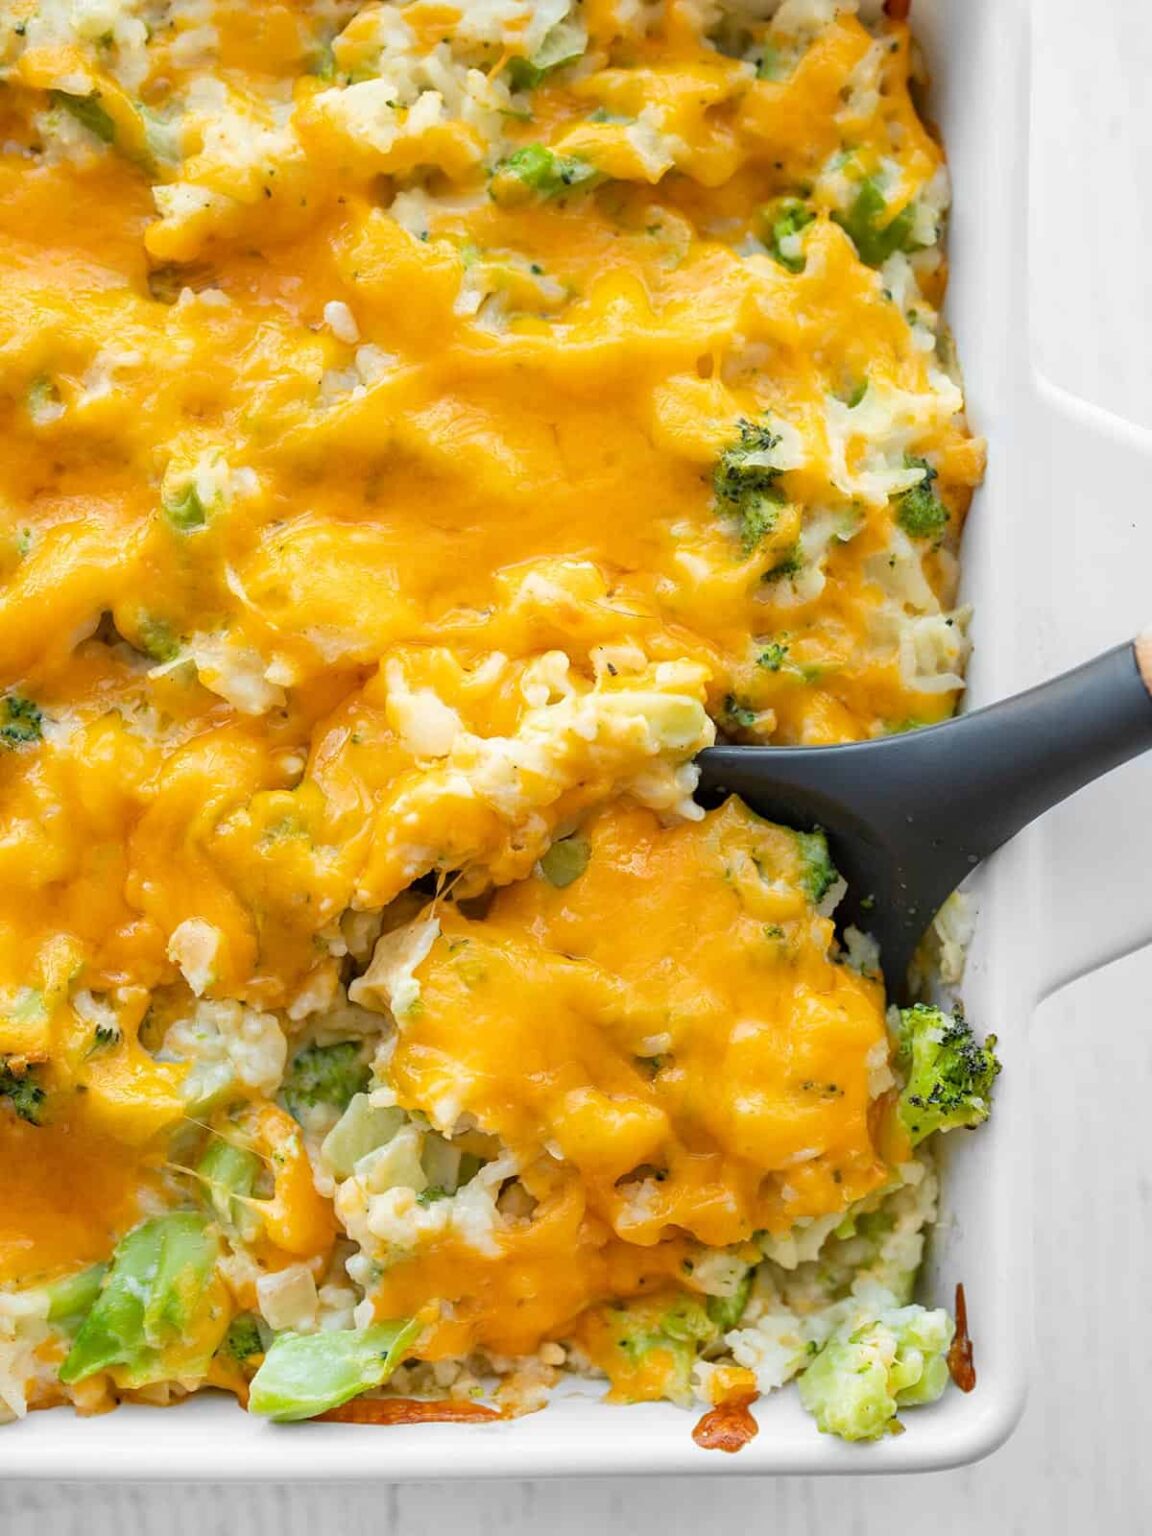 Broccoli Cheese Casserole (From Scratch) - Budget Bytes